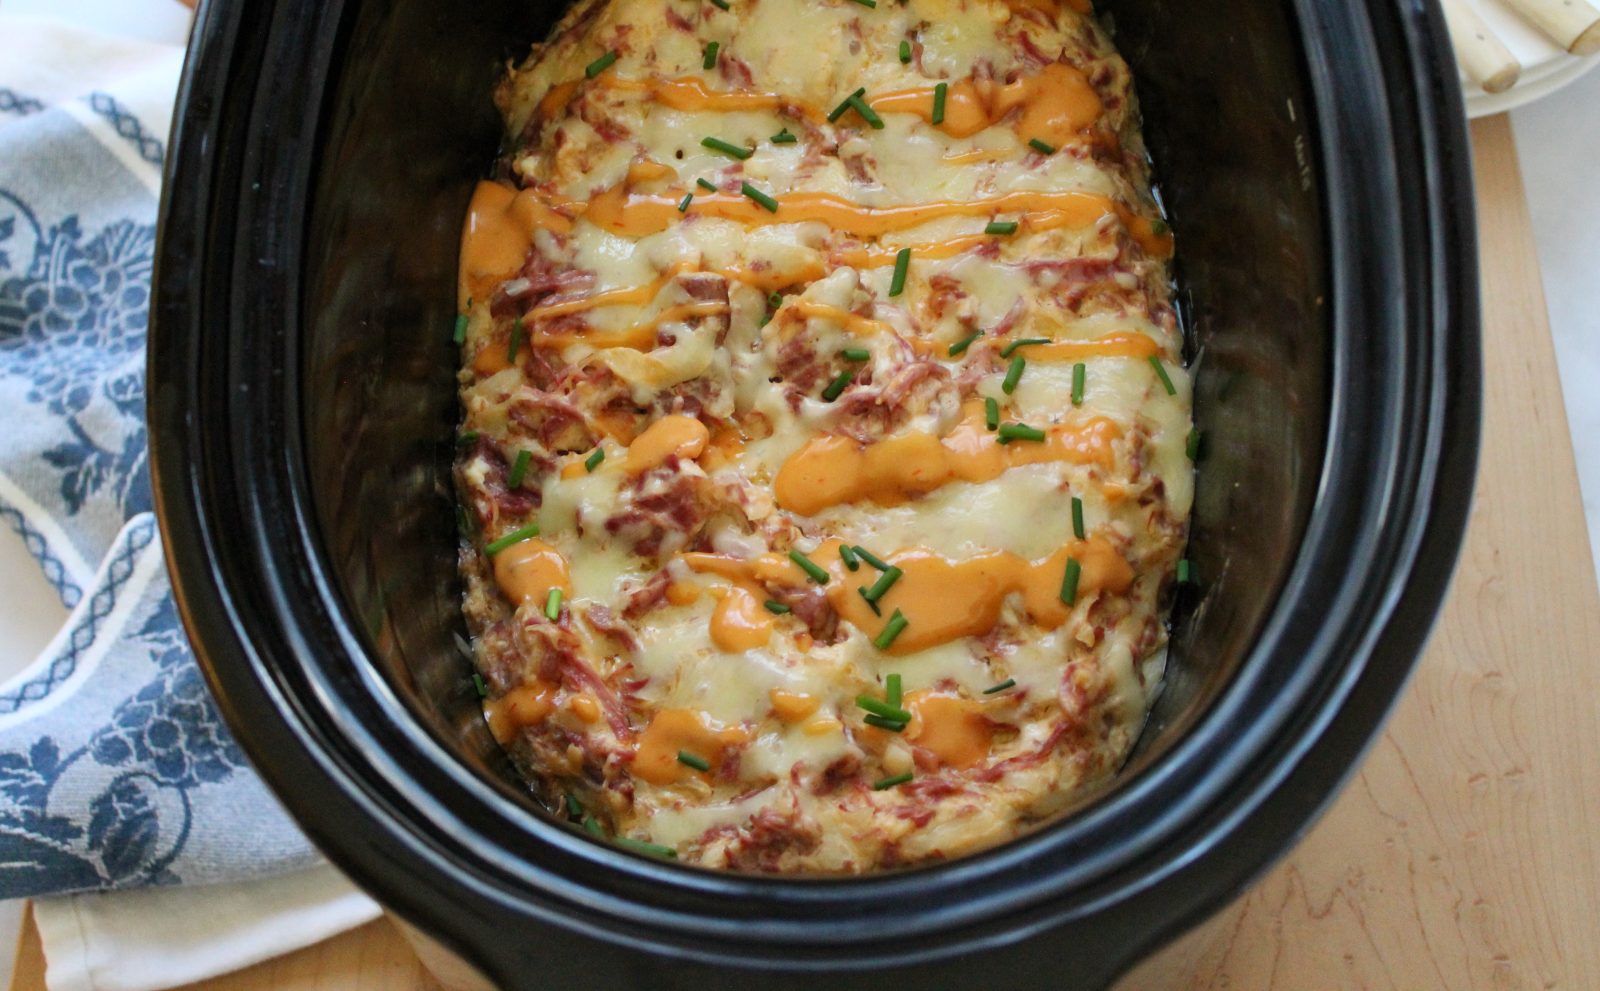 Close up shot of Reuben Dip in a black slow cooker.  The dip is topped with extra melted swiss cheese, a drizzle of Russian dressing and a sprinkling of snipped chives.